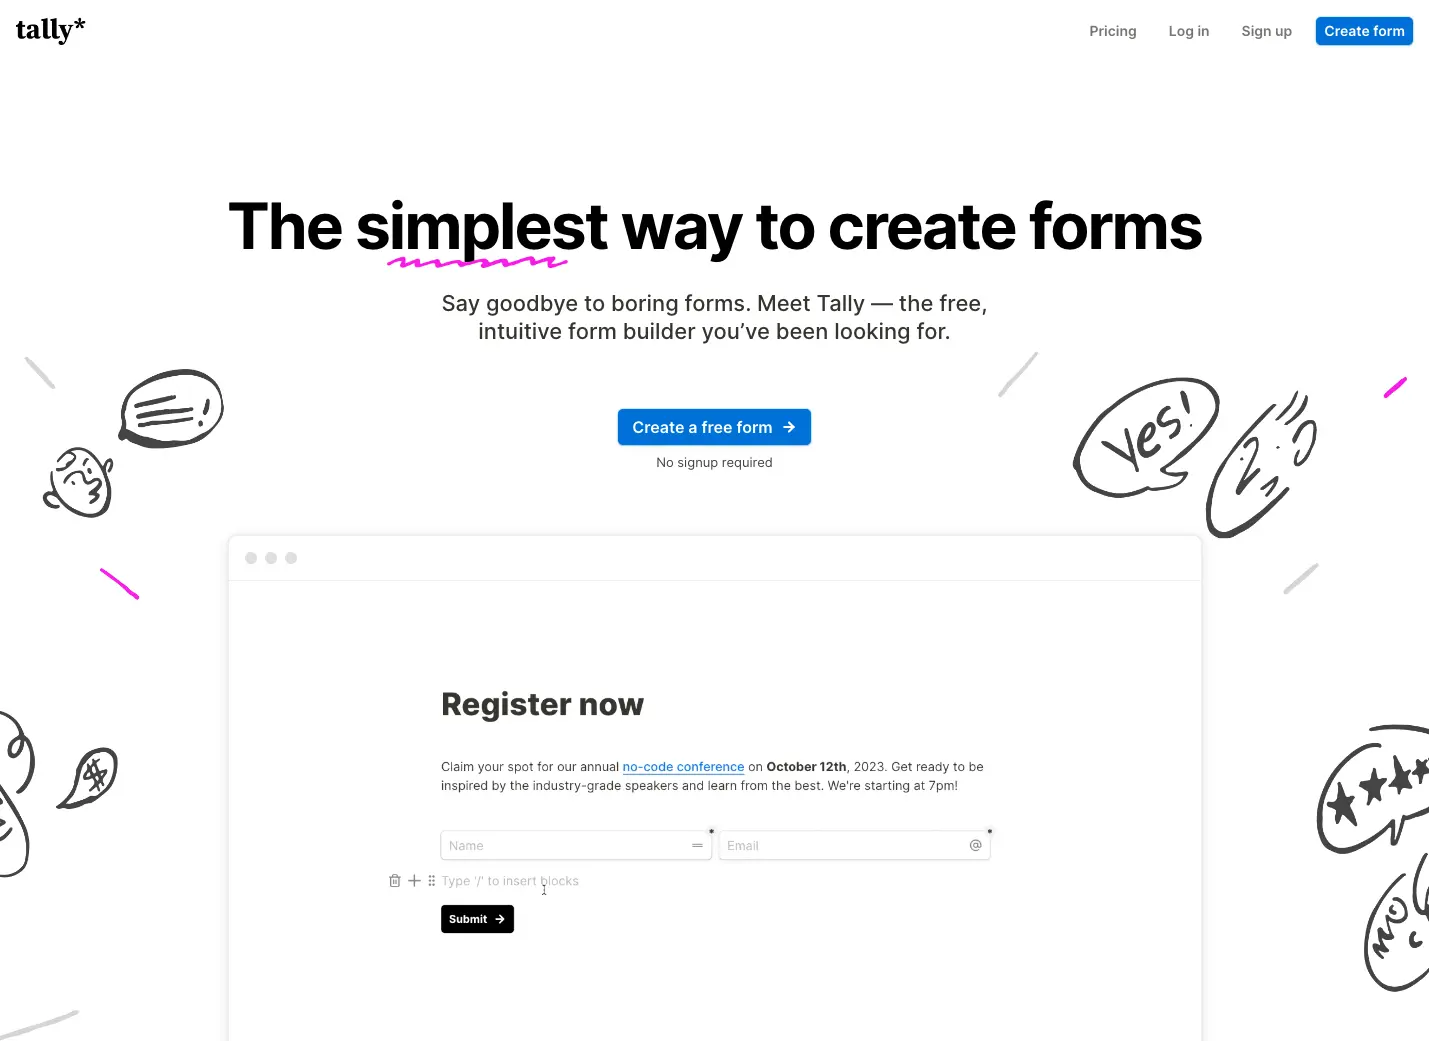 Tally landing page